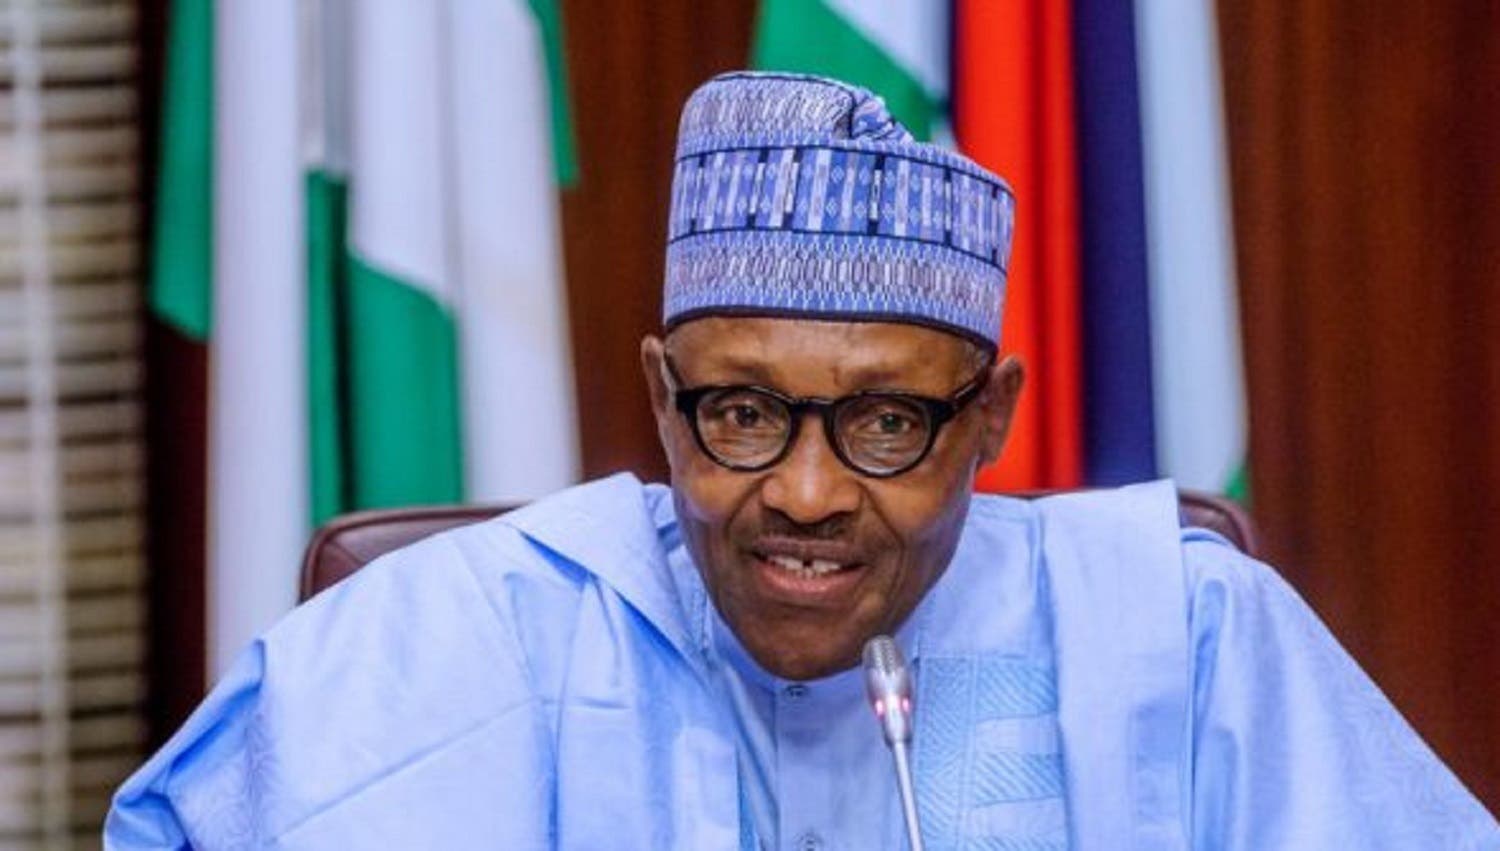 PRESIDENT BUHARI APPOINTS NEW SERVICE CHIEFS